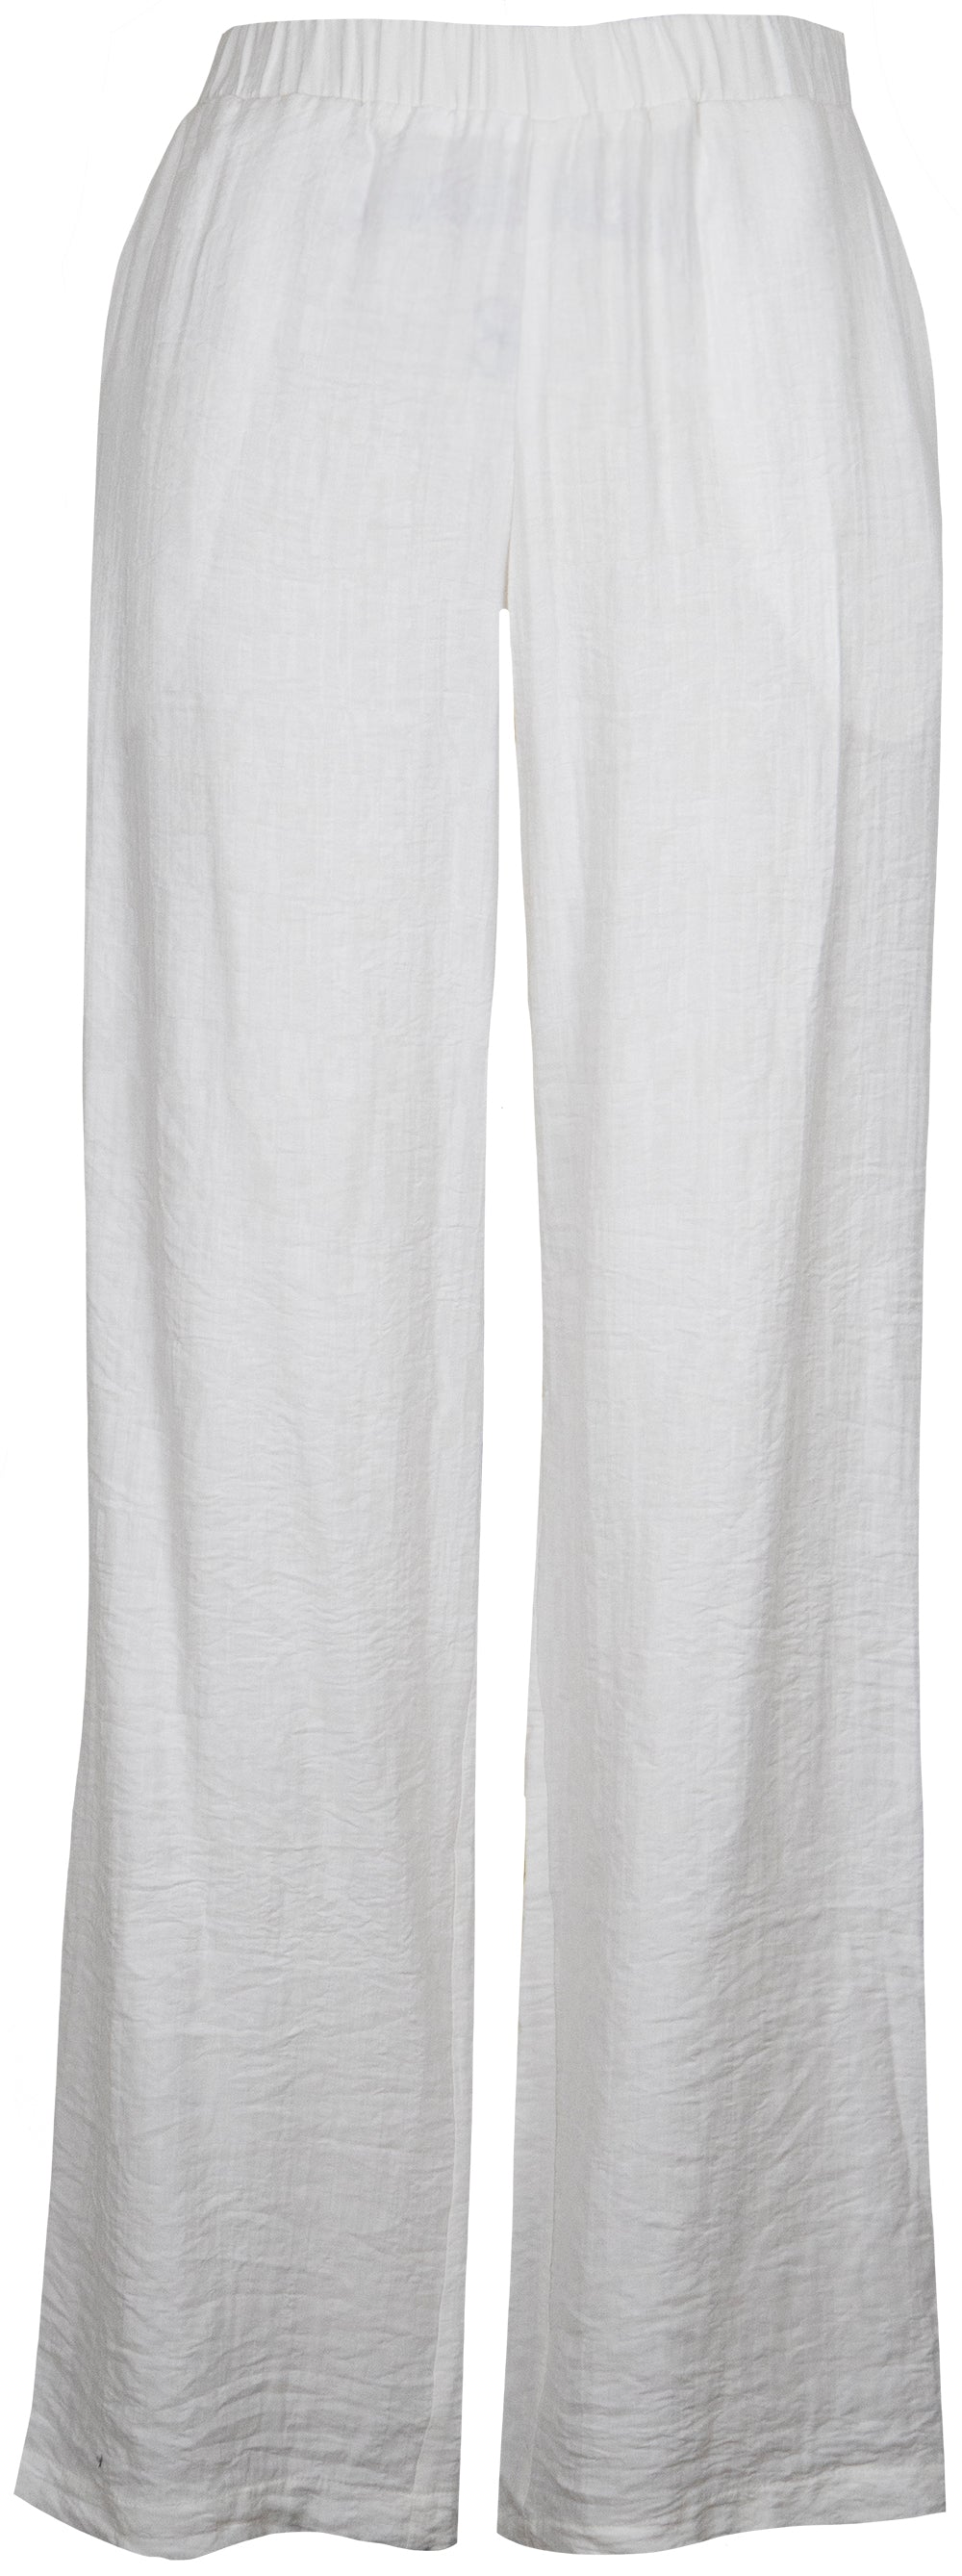 Ursa Relaxed Pant